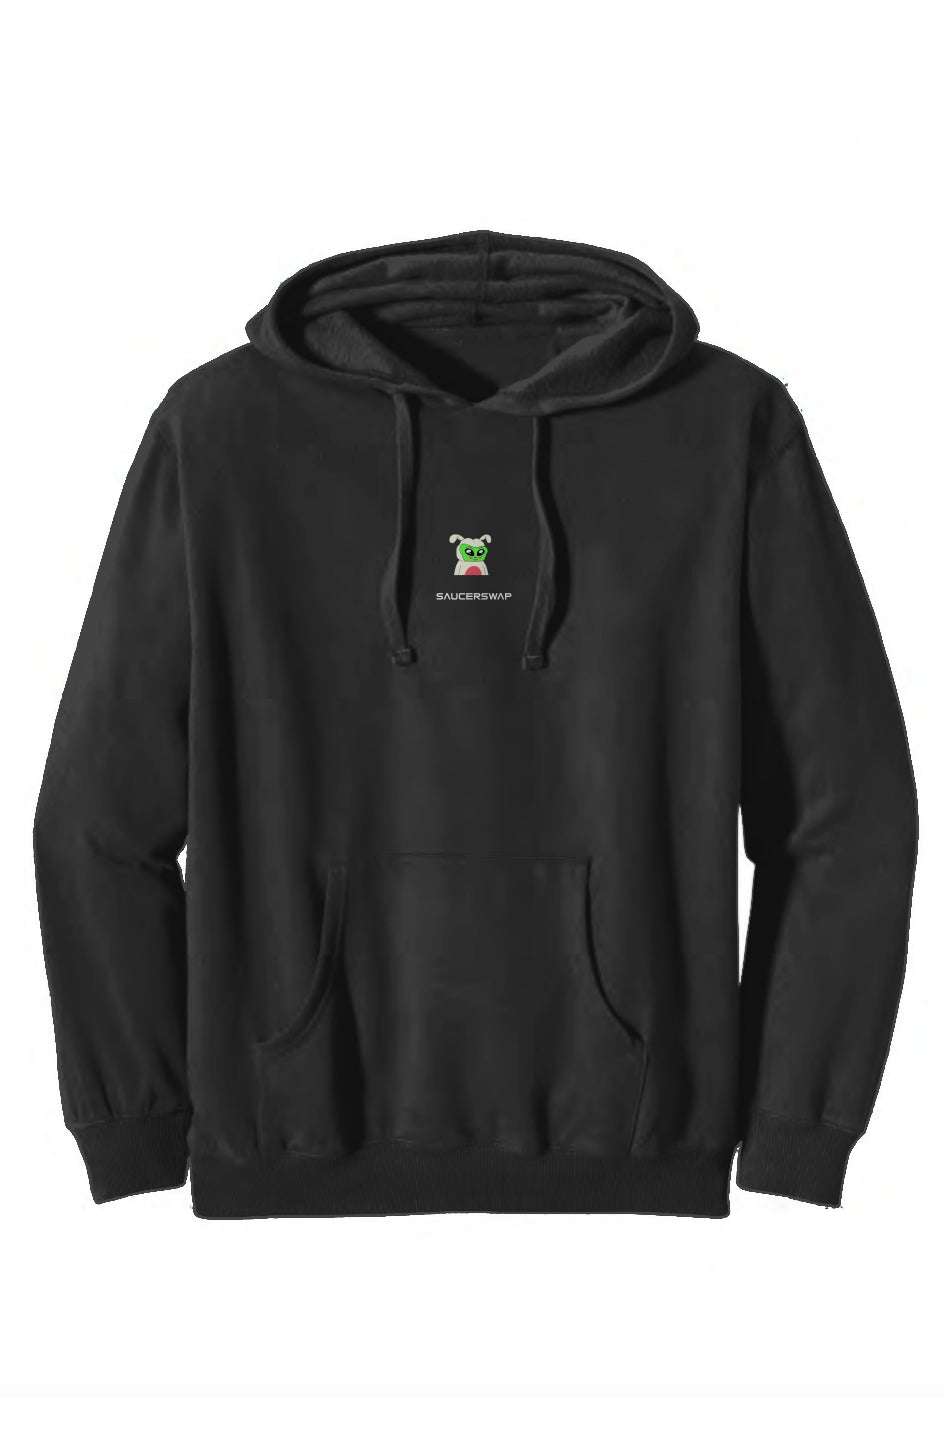 larry bunny organic/recycled pullover hooded sweatshirt